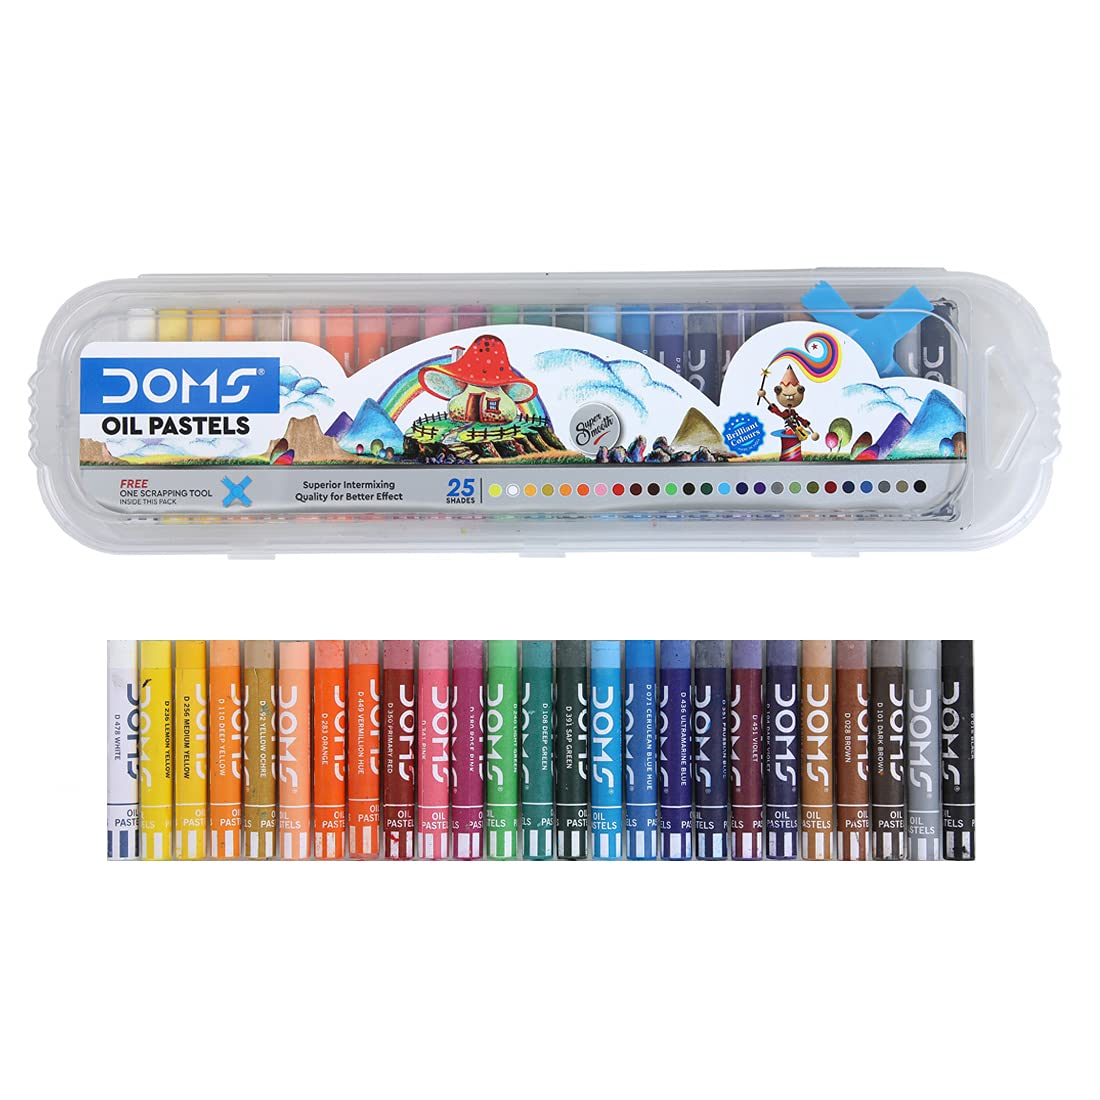 Doms Non-Toxic 9mm Oil Pastel Set in Plastic Case (25 Assorted Shades)